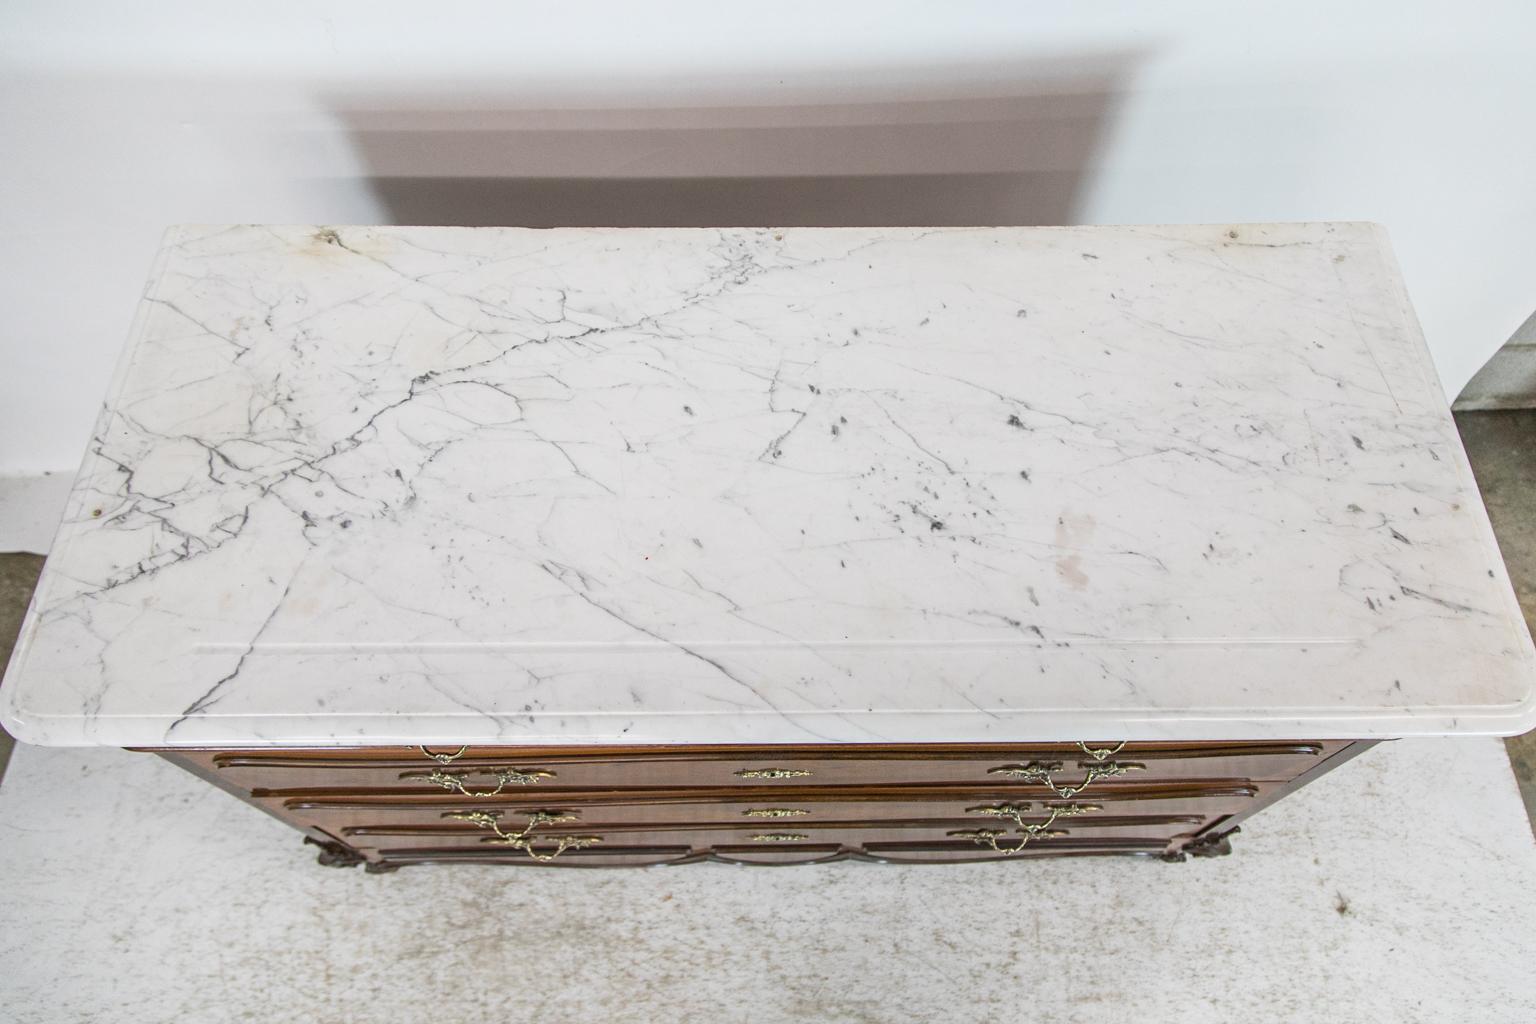 This chest has a Carrera marble with a shaped groove in the front. There are three holes on the back edge which have been filled. The drawer fronts have applied shaped raised panels in serpentine shapes. The sides have recessed panels. There is a